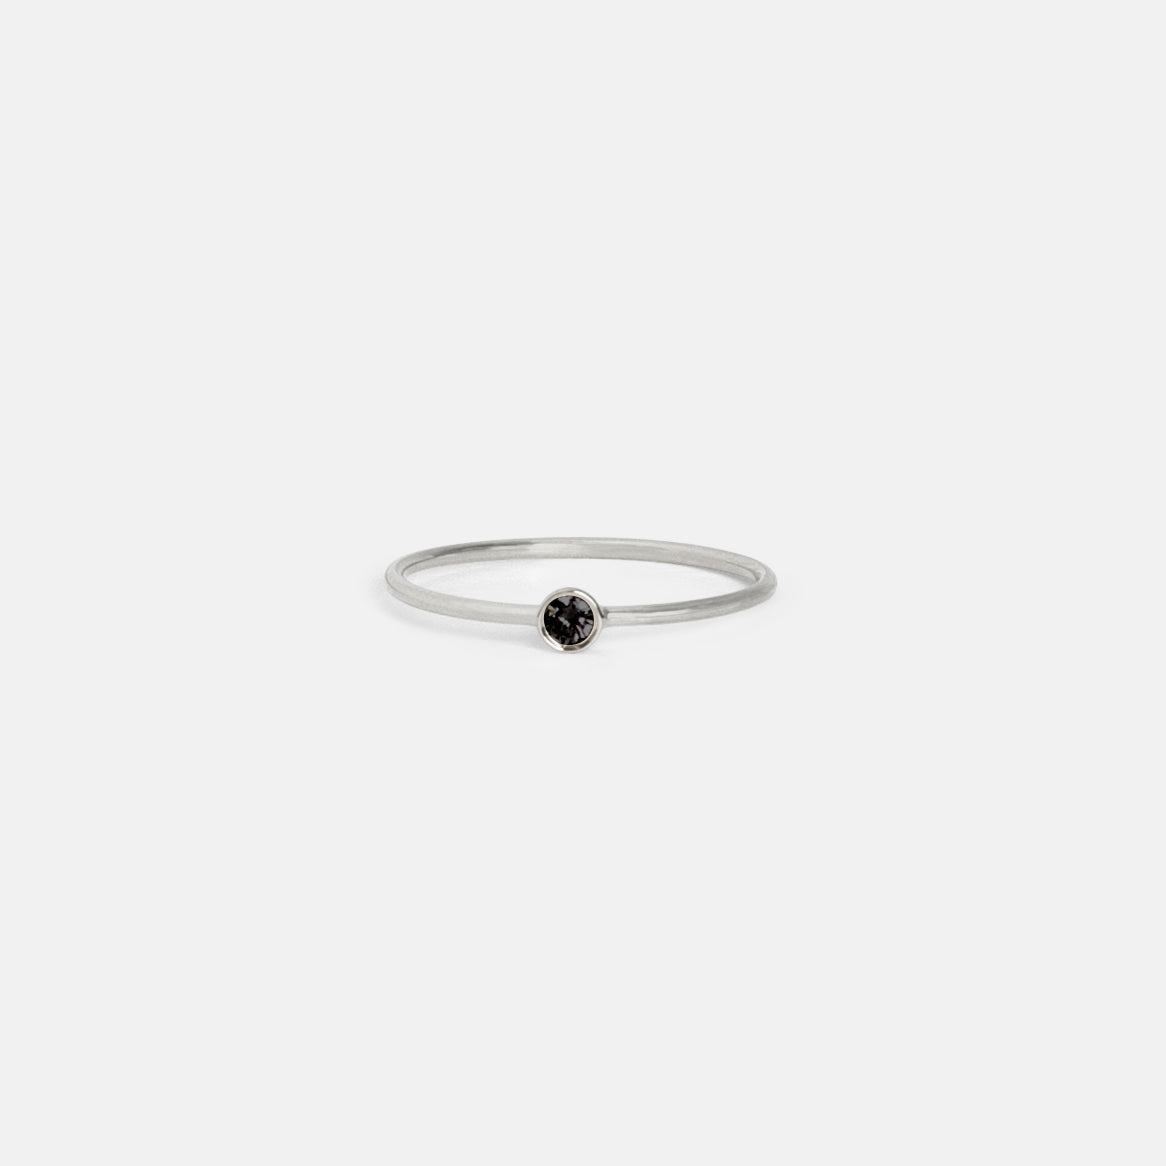 Large Kaya Ring in 14k White Gold set with black Diamond by SHW Fine Jewelry